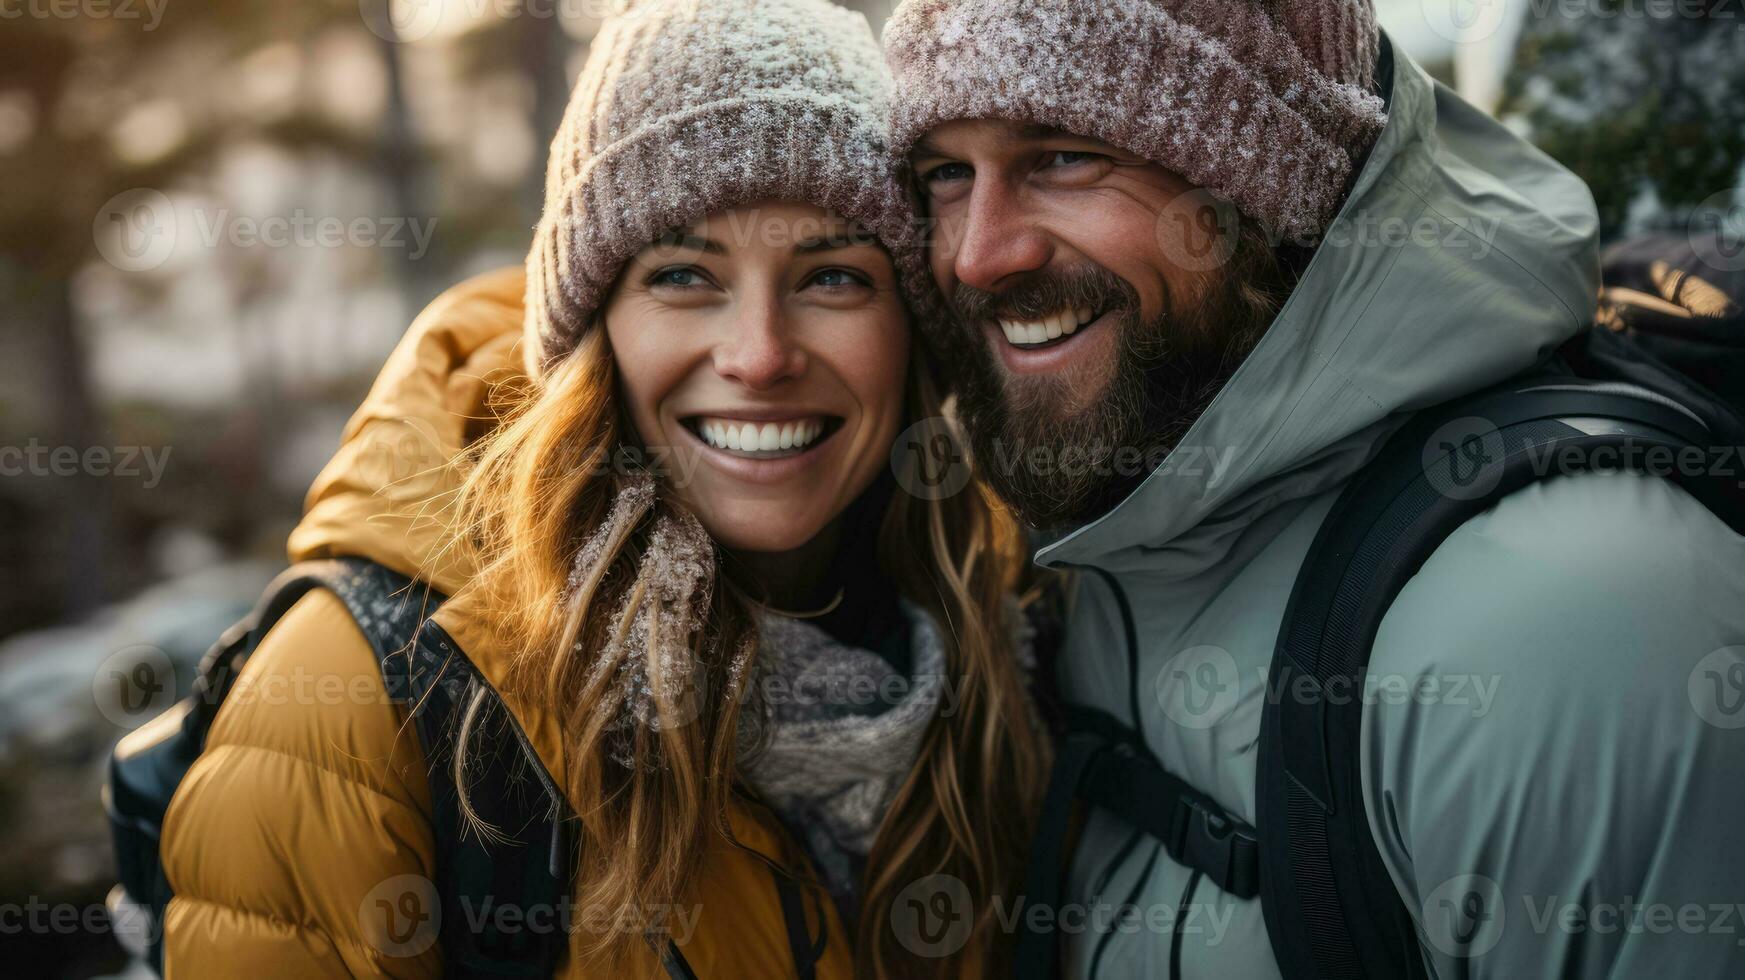 Charming couple enthusiastically capturing winter wildlife images in a frosty National Park photo